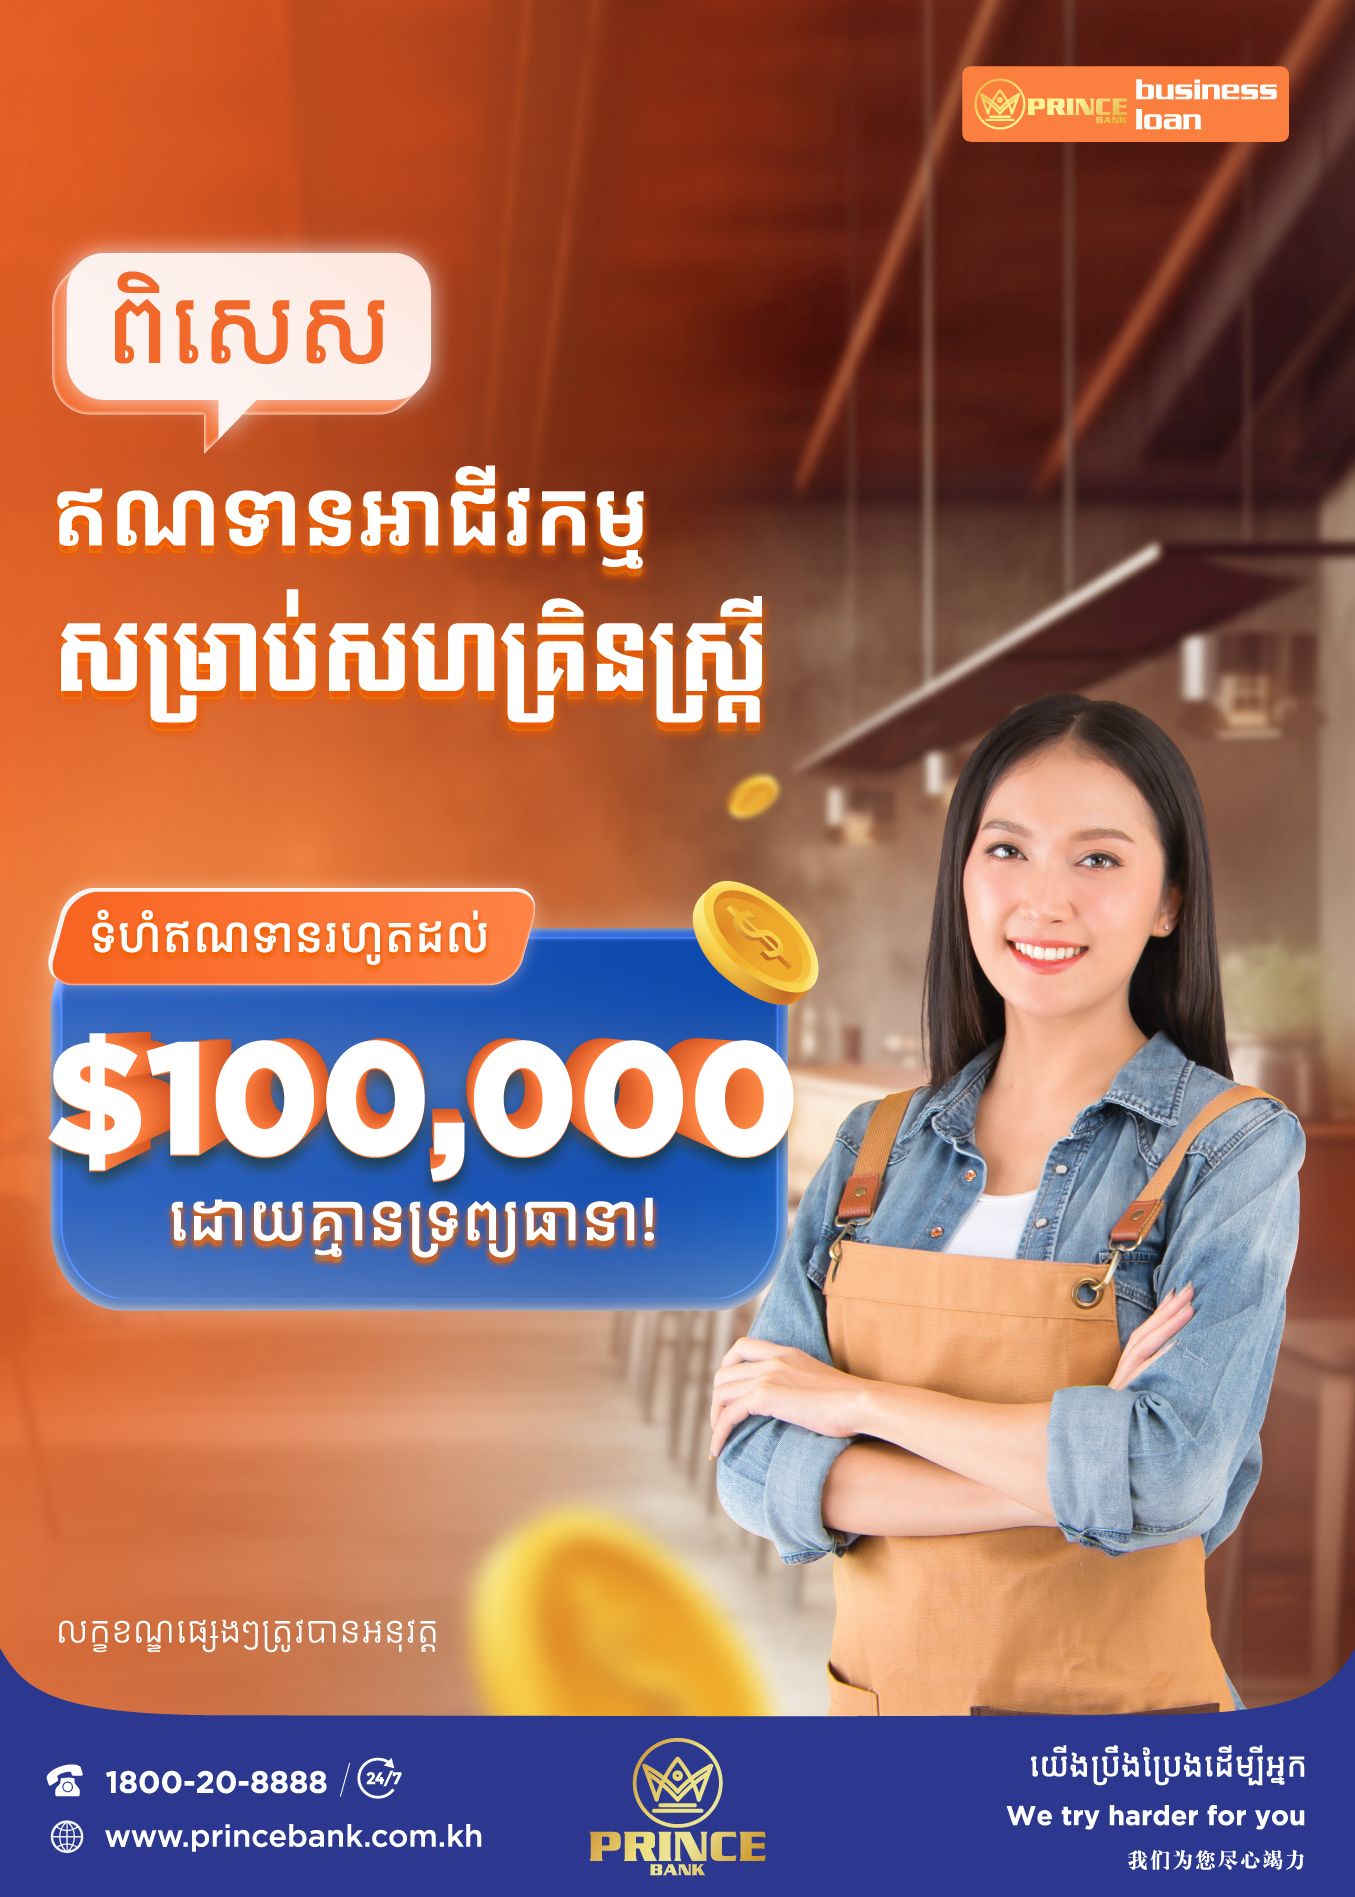 Special Offer on Business Loans for Women Entrepre